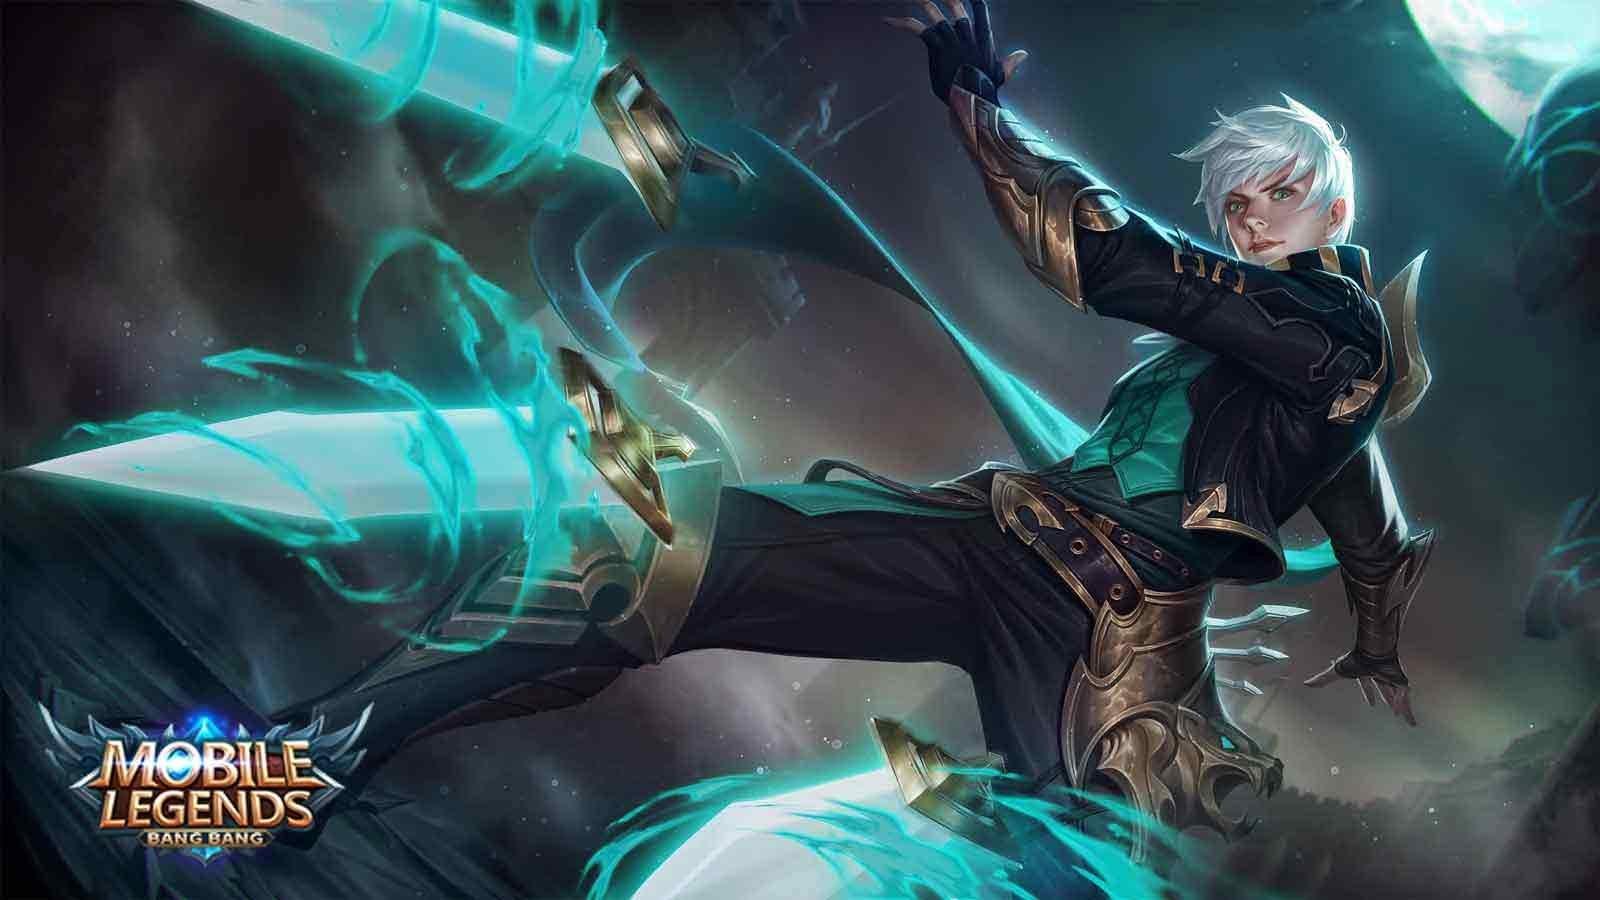 How to win in Mobile Legends according to the top teams